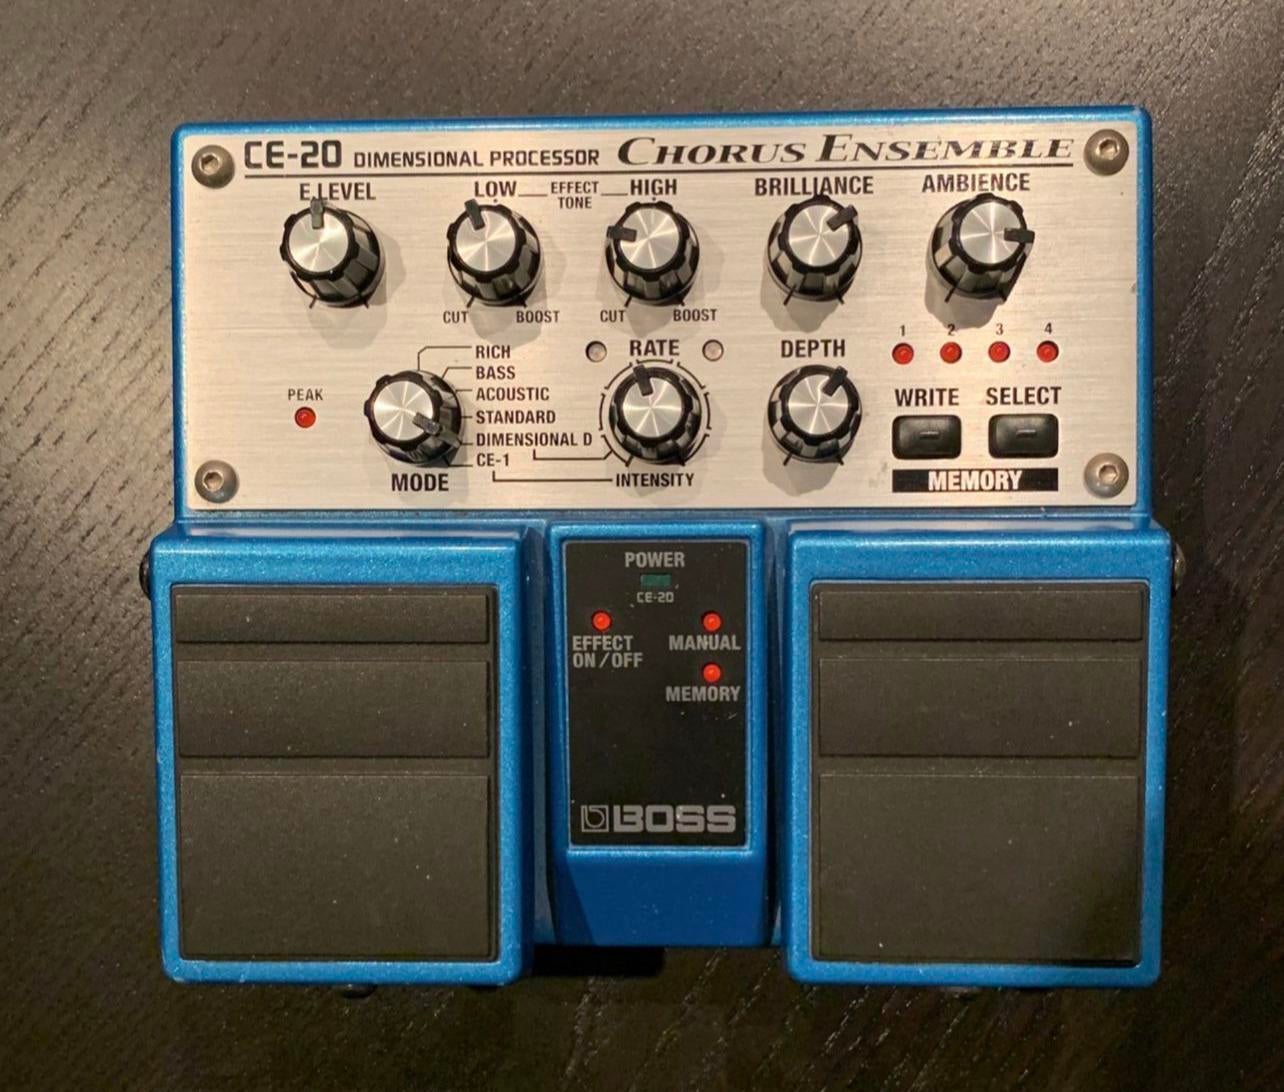 Used Boss CE-20 Chorus Ensemble - Sweetwater's Gear Exchange